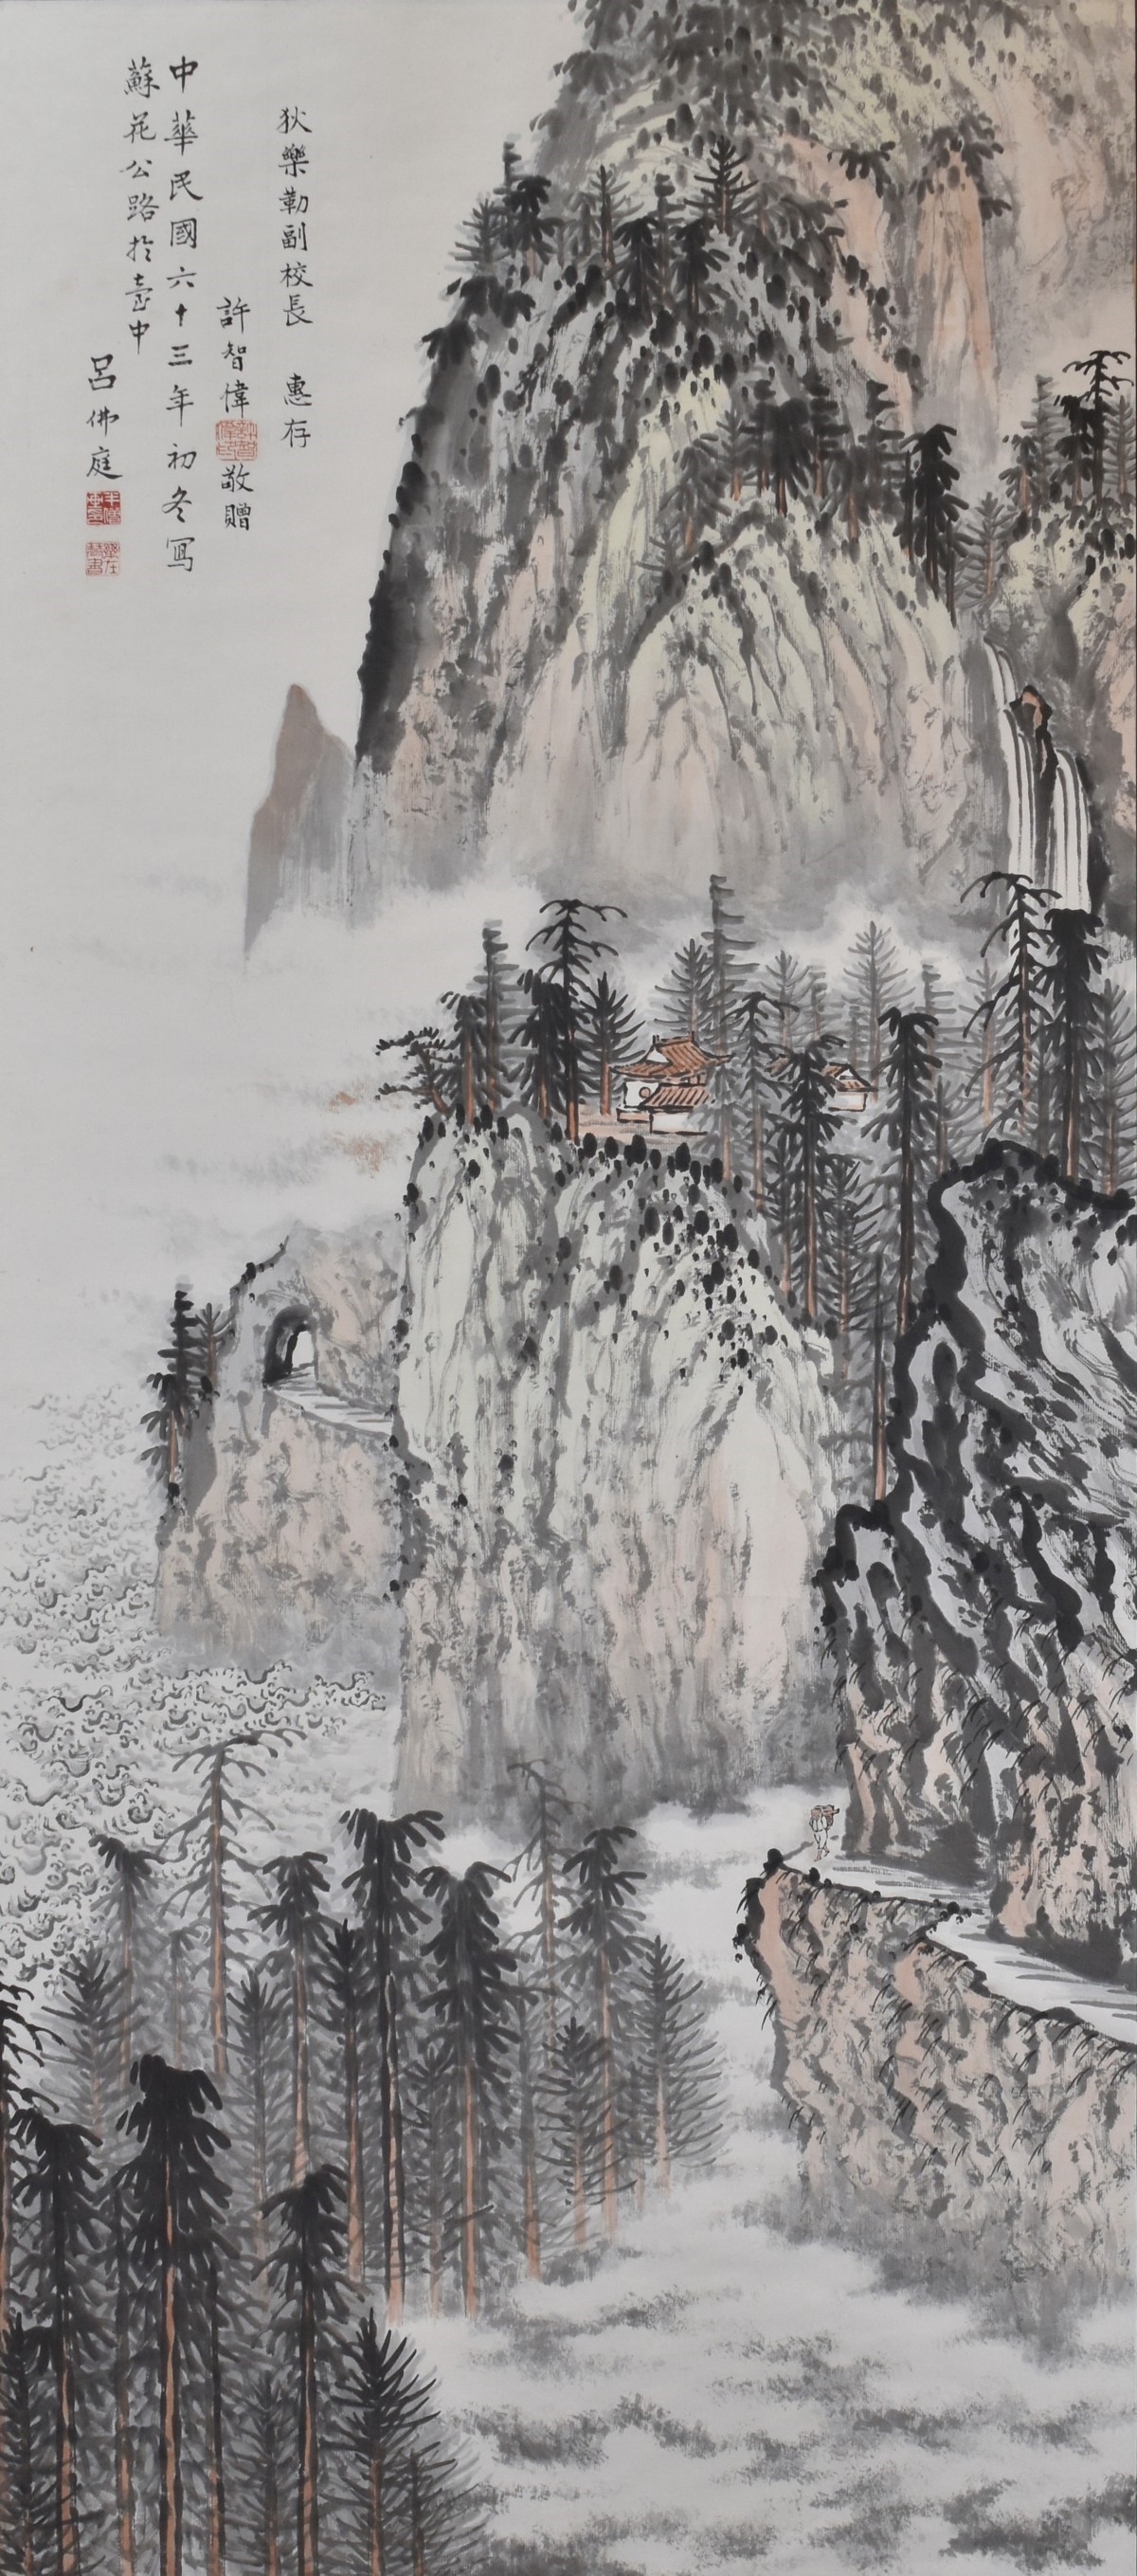 Artwork by Lü Foting, Chinese scroll painting in ink on paper depicting a lovely mountainous landscape, Made of painting in ink on paper